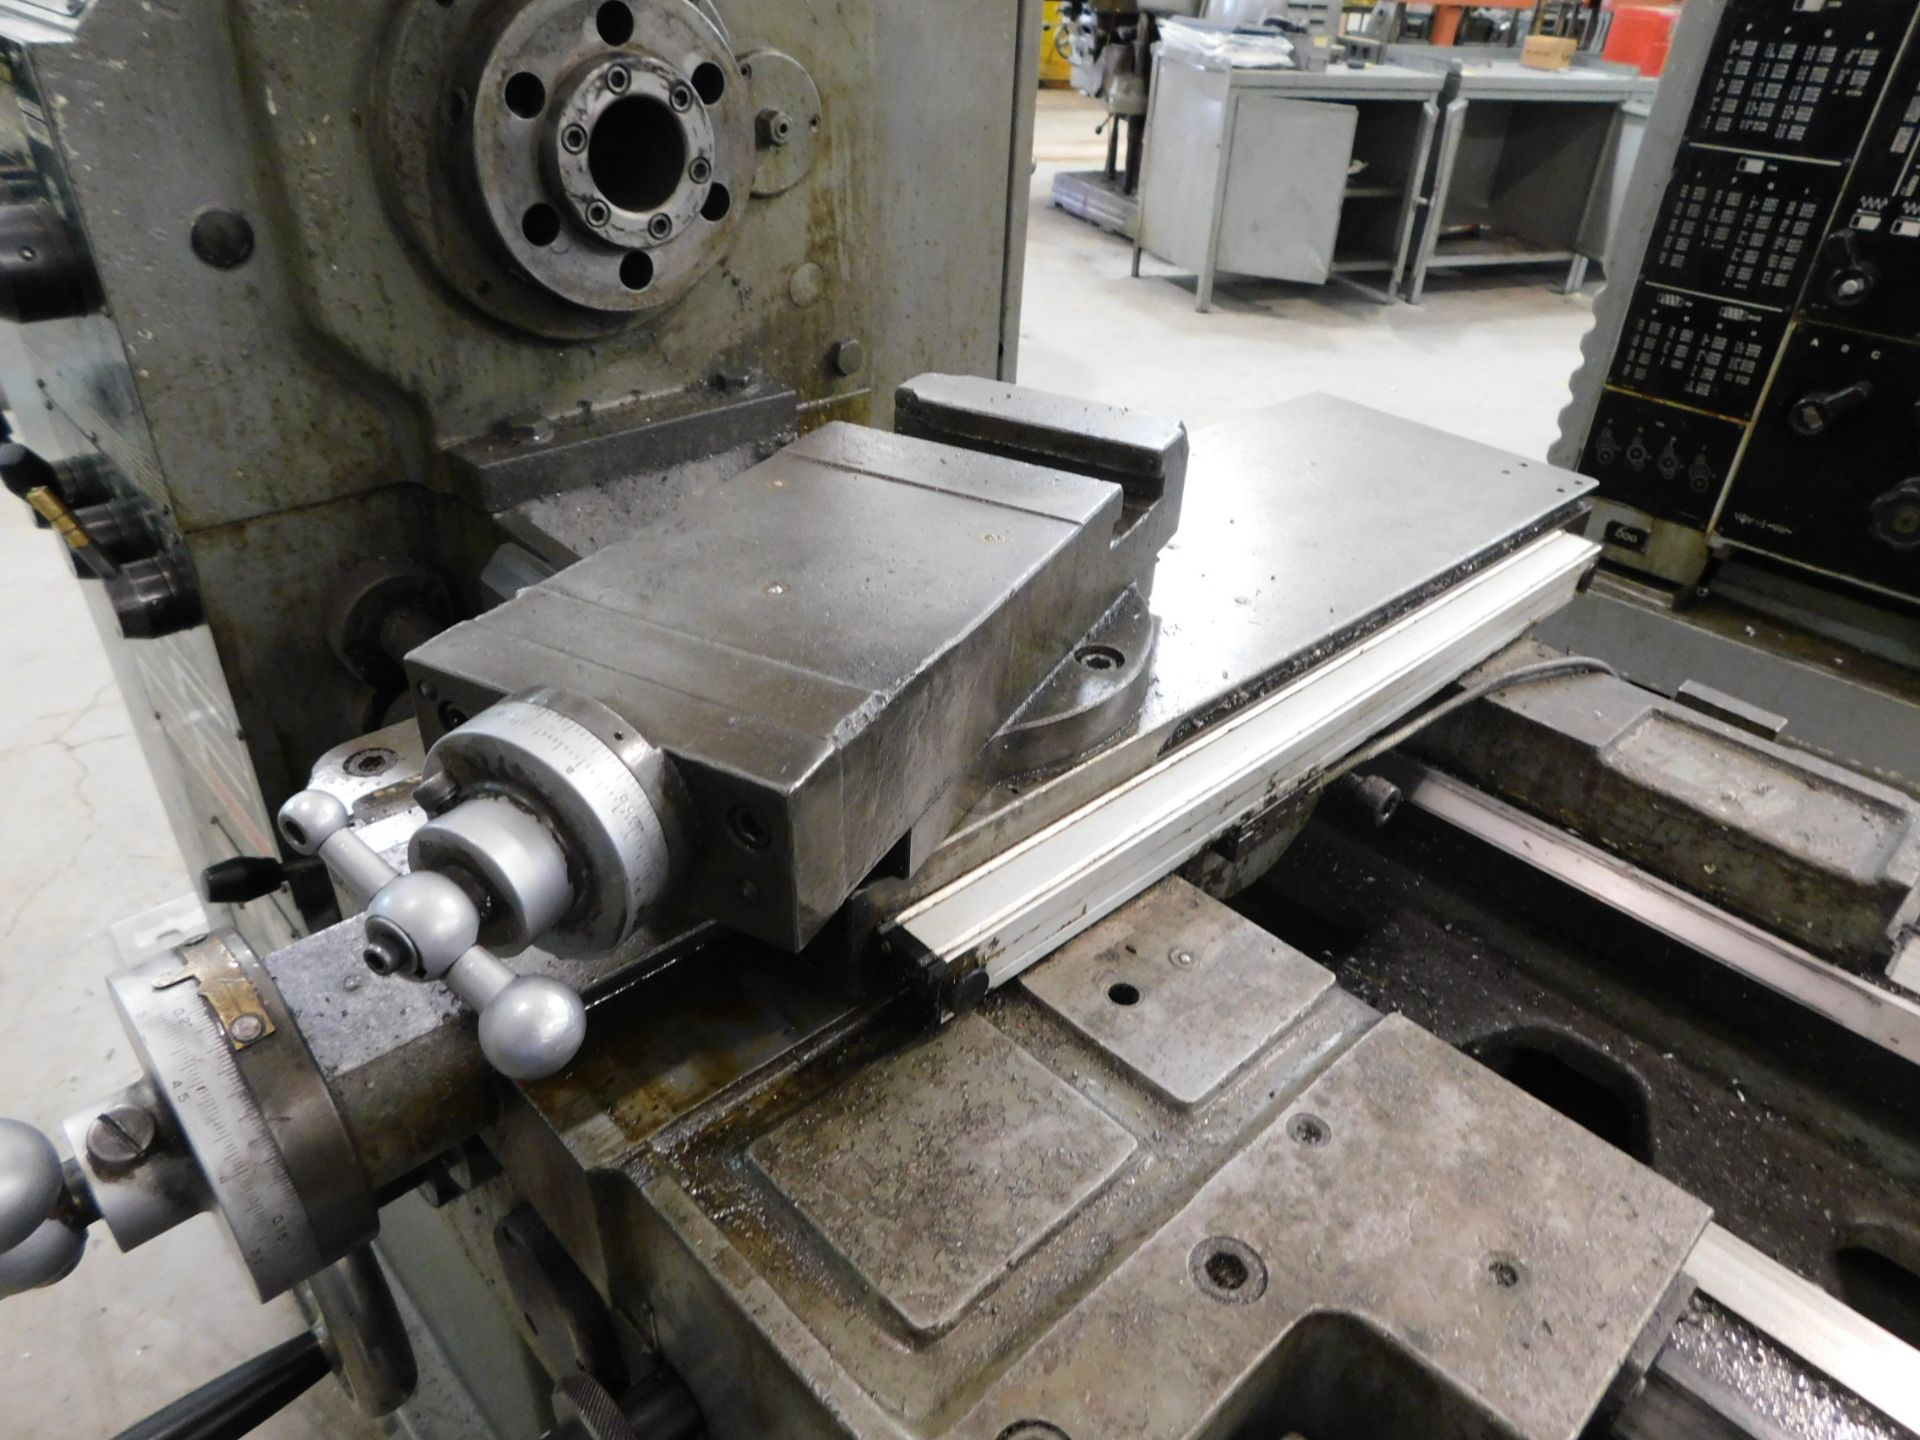 South Bend 400 16" x 36" Toolroom Lathe, SN 020230, with Anilam Wizard 411 2-Axis Digital Readout - Image 3 of 15